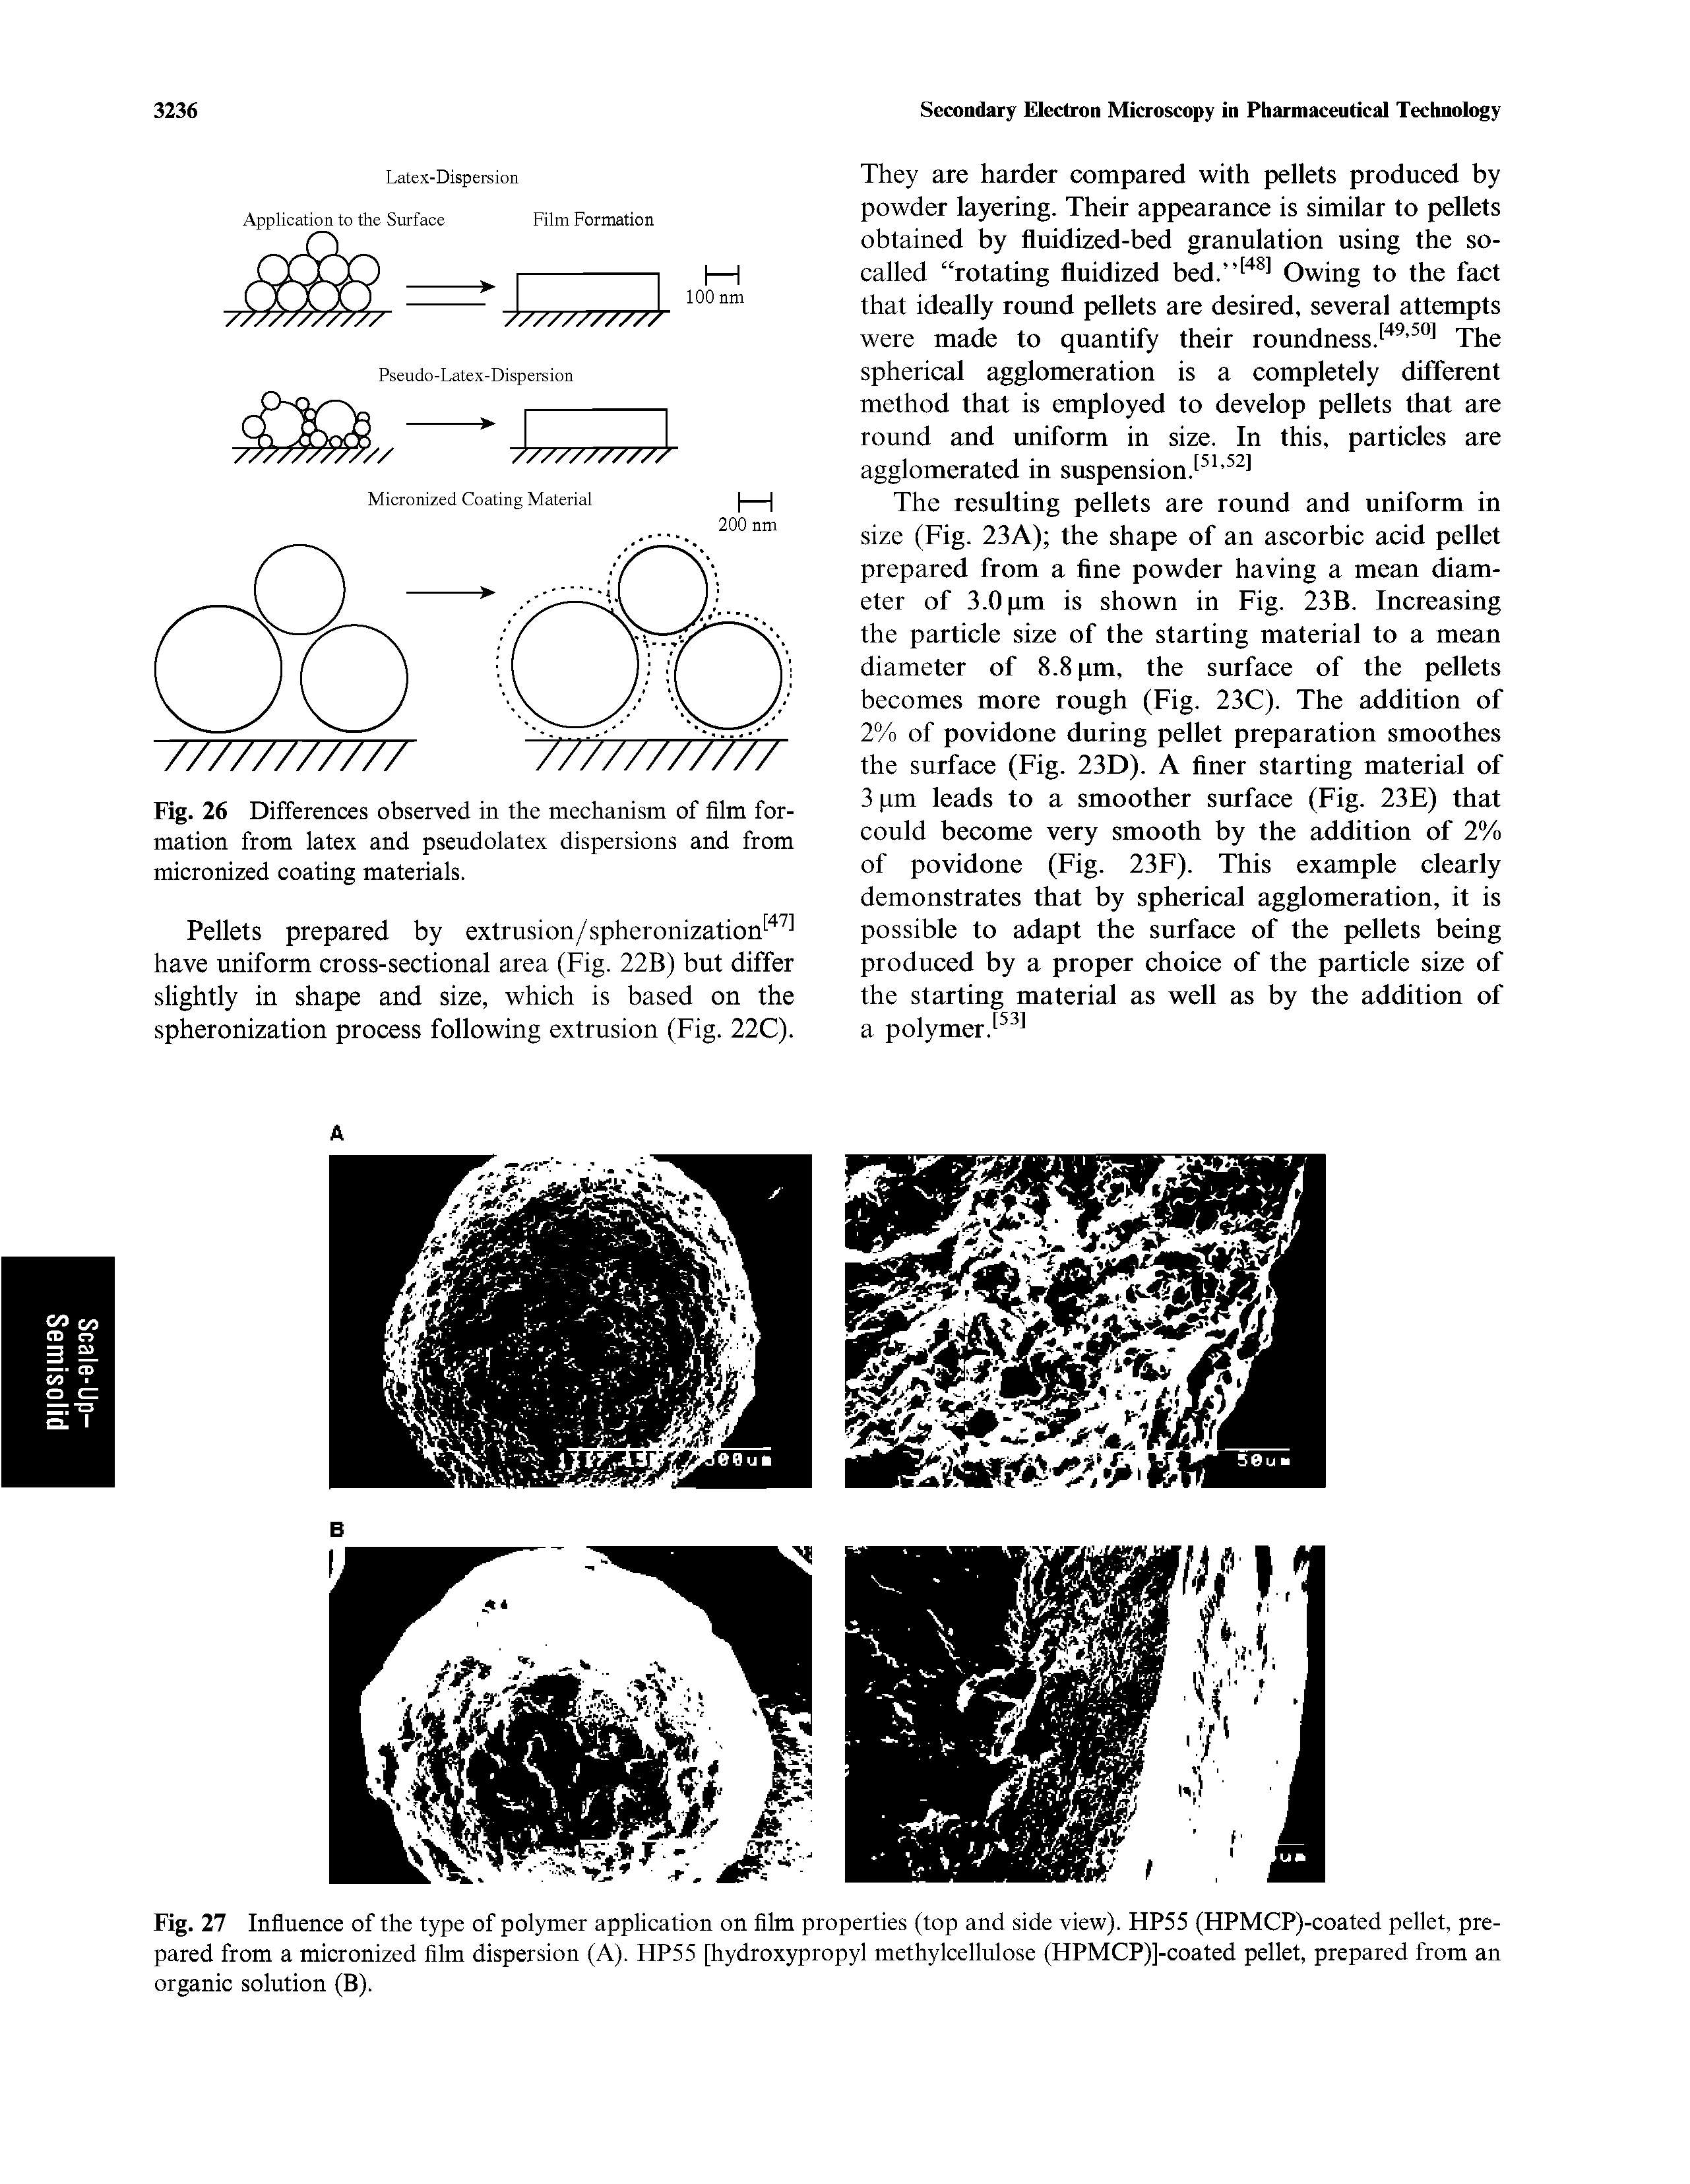 Fig. 27 Infiuence of the type of polymer application on film properties (top and side view). HP55 (HPMCP)-coated pellet, prepared from a micronized film dispersion (A). HP55 [hydroxypropyl methylcellulose (HPMCP)]-coated pellet, prepared from an organic solution (B).